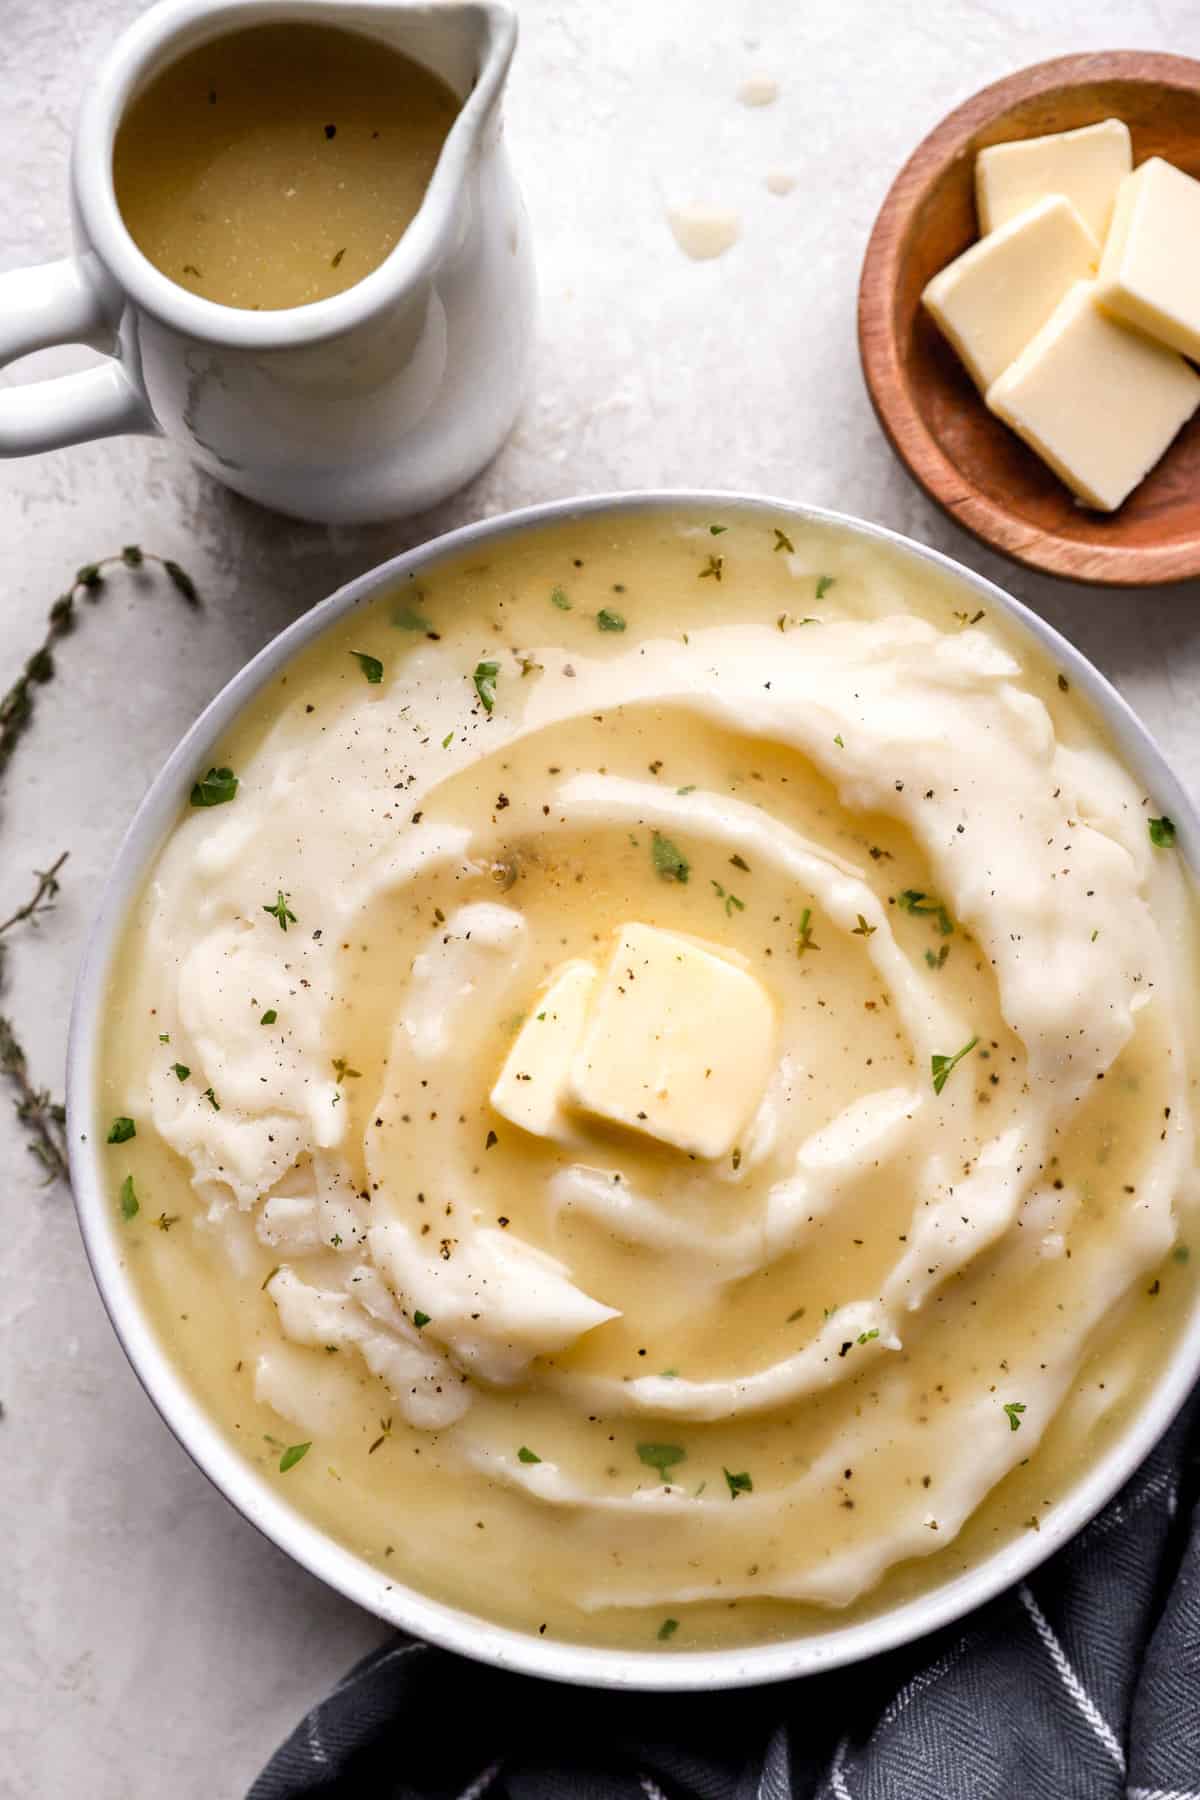 gluten free gravy pooled in a bowl of mashed potatoes topped with a pat of butter from above.